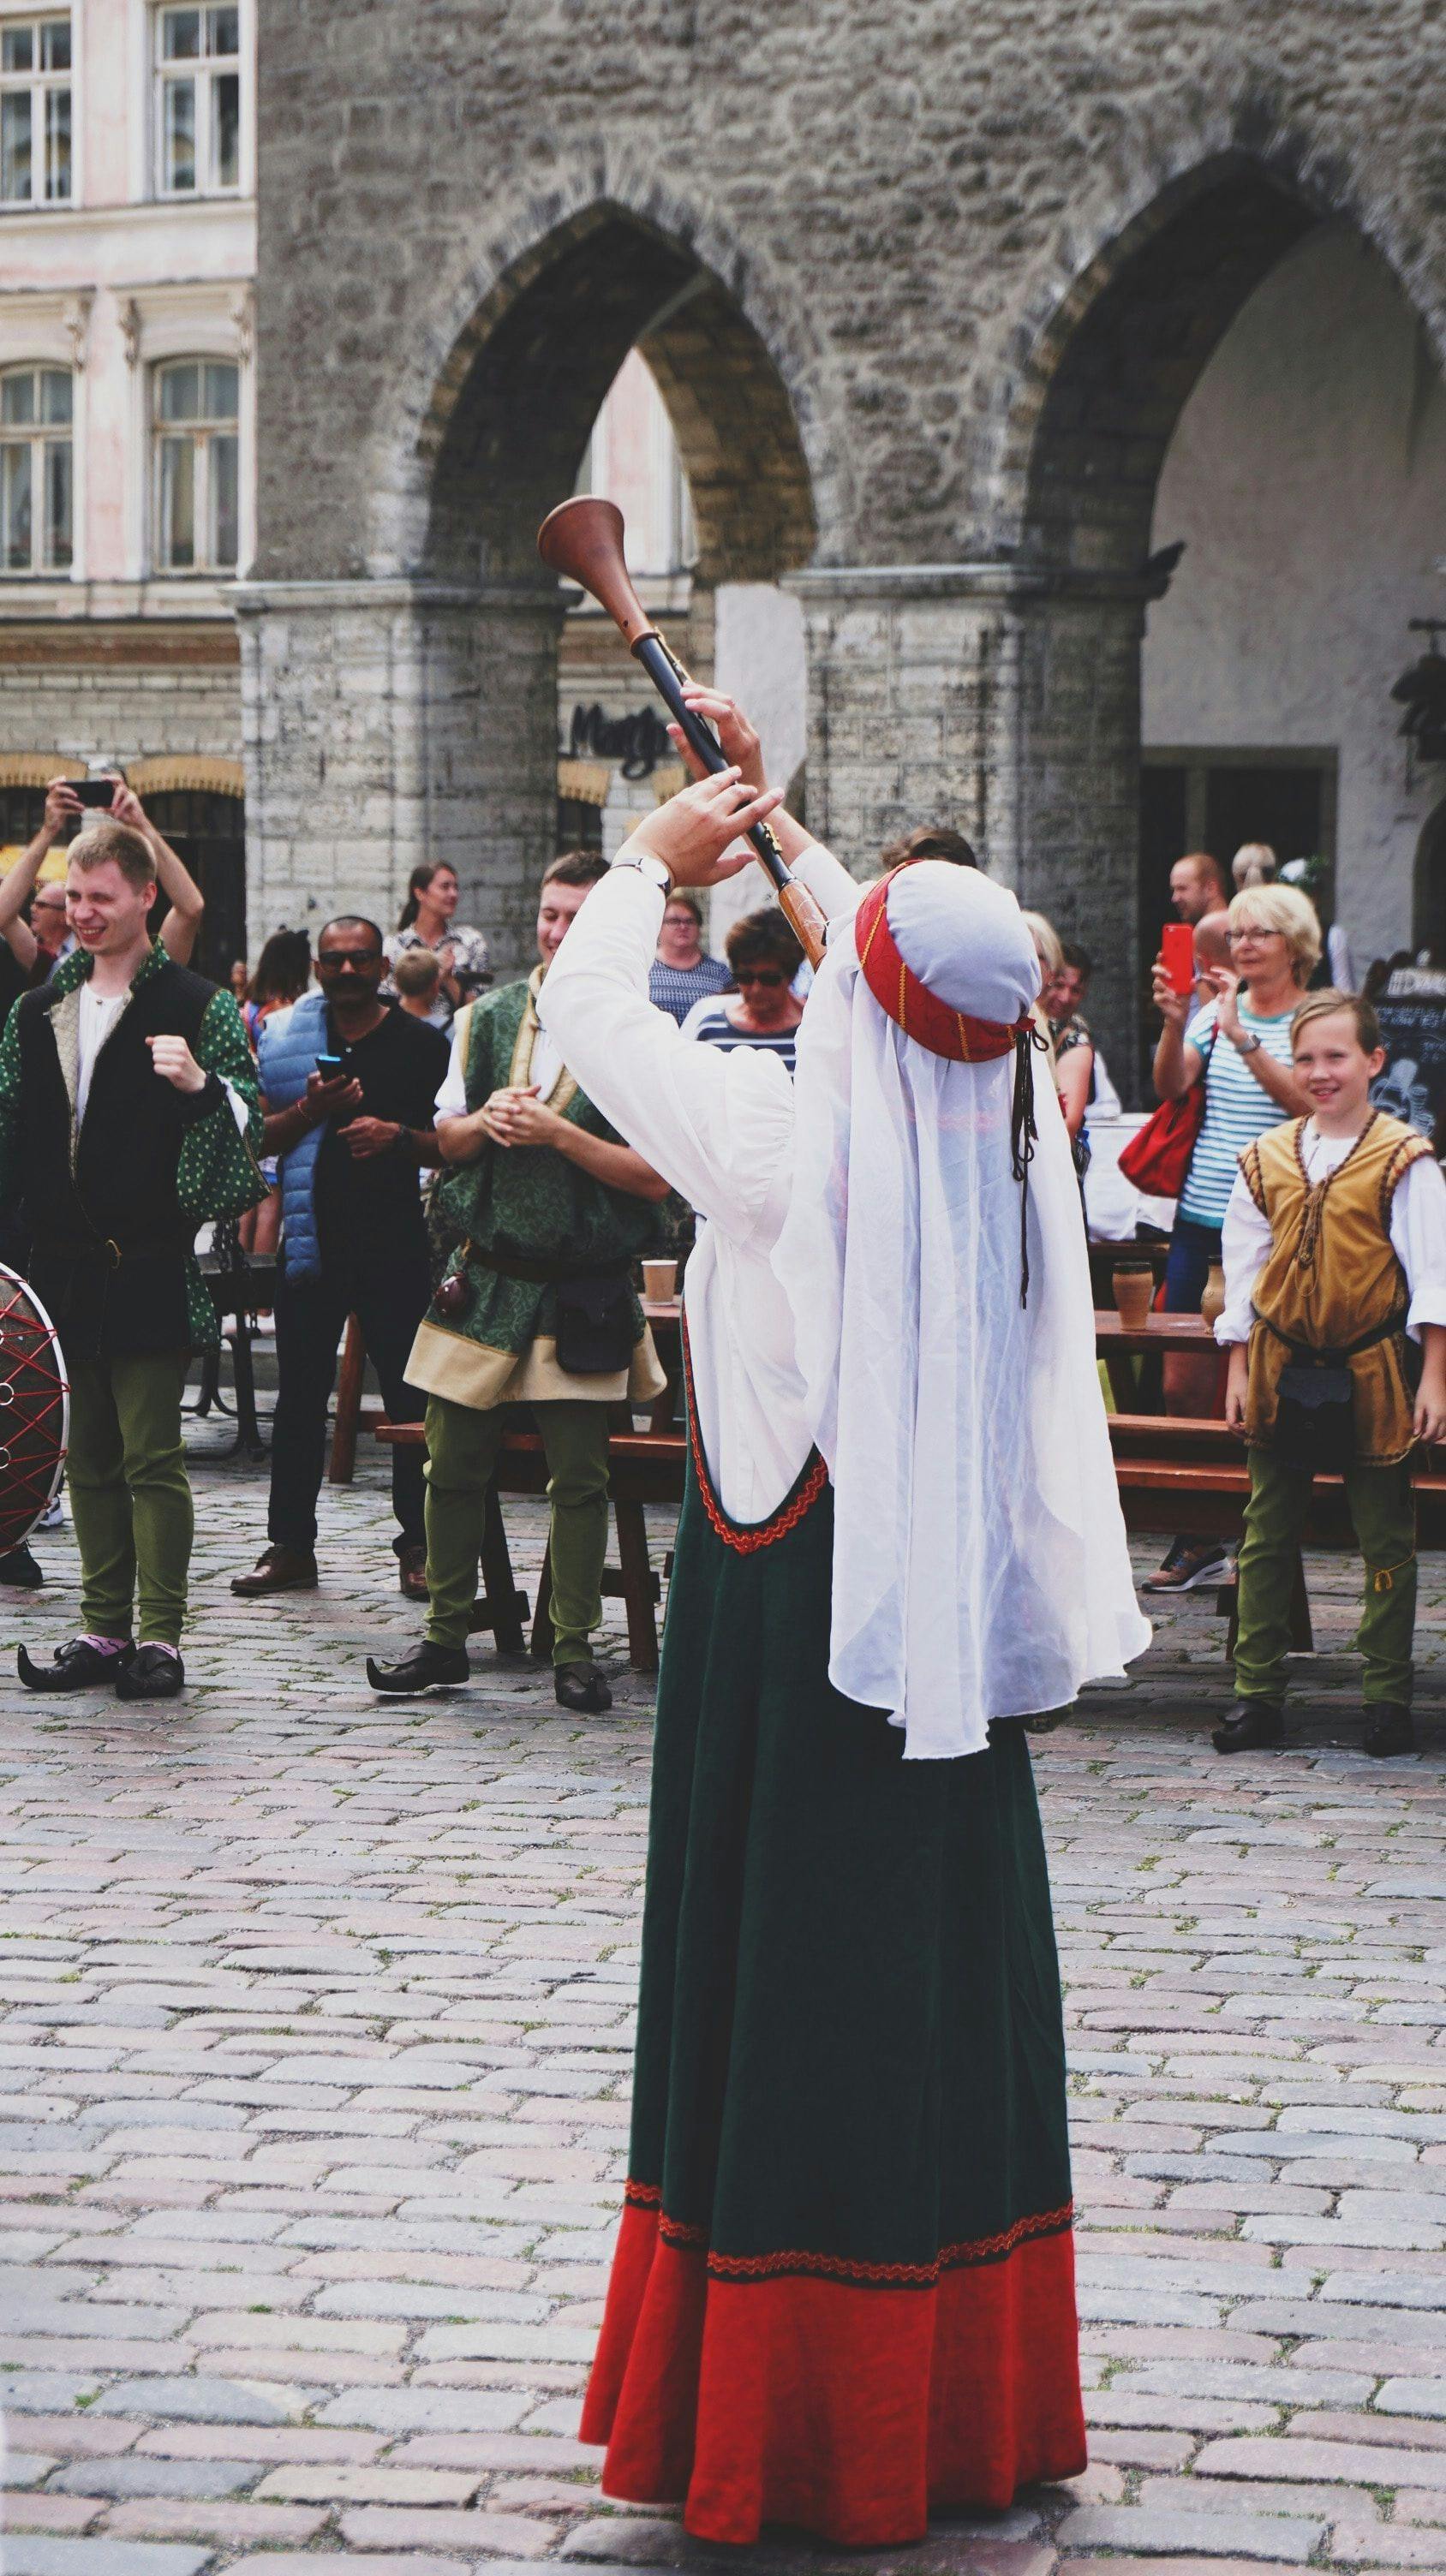 Woman wearing medieval costume playing music in Tallinn.